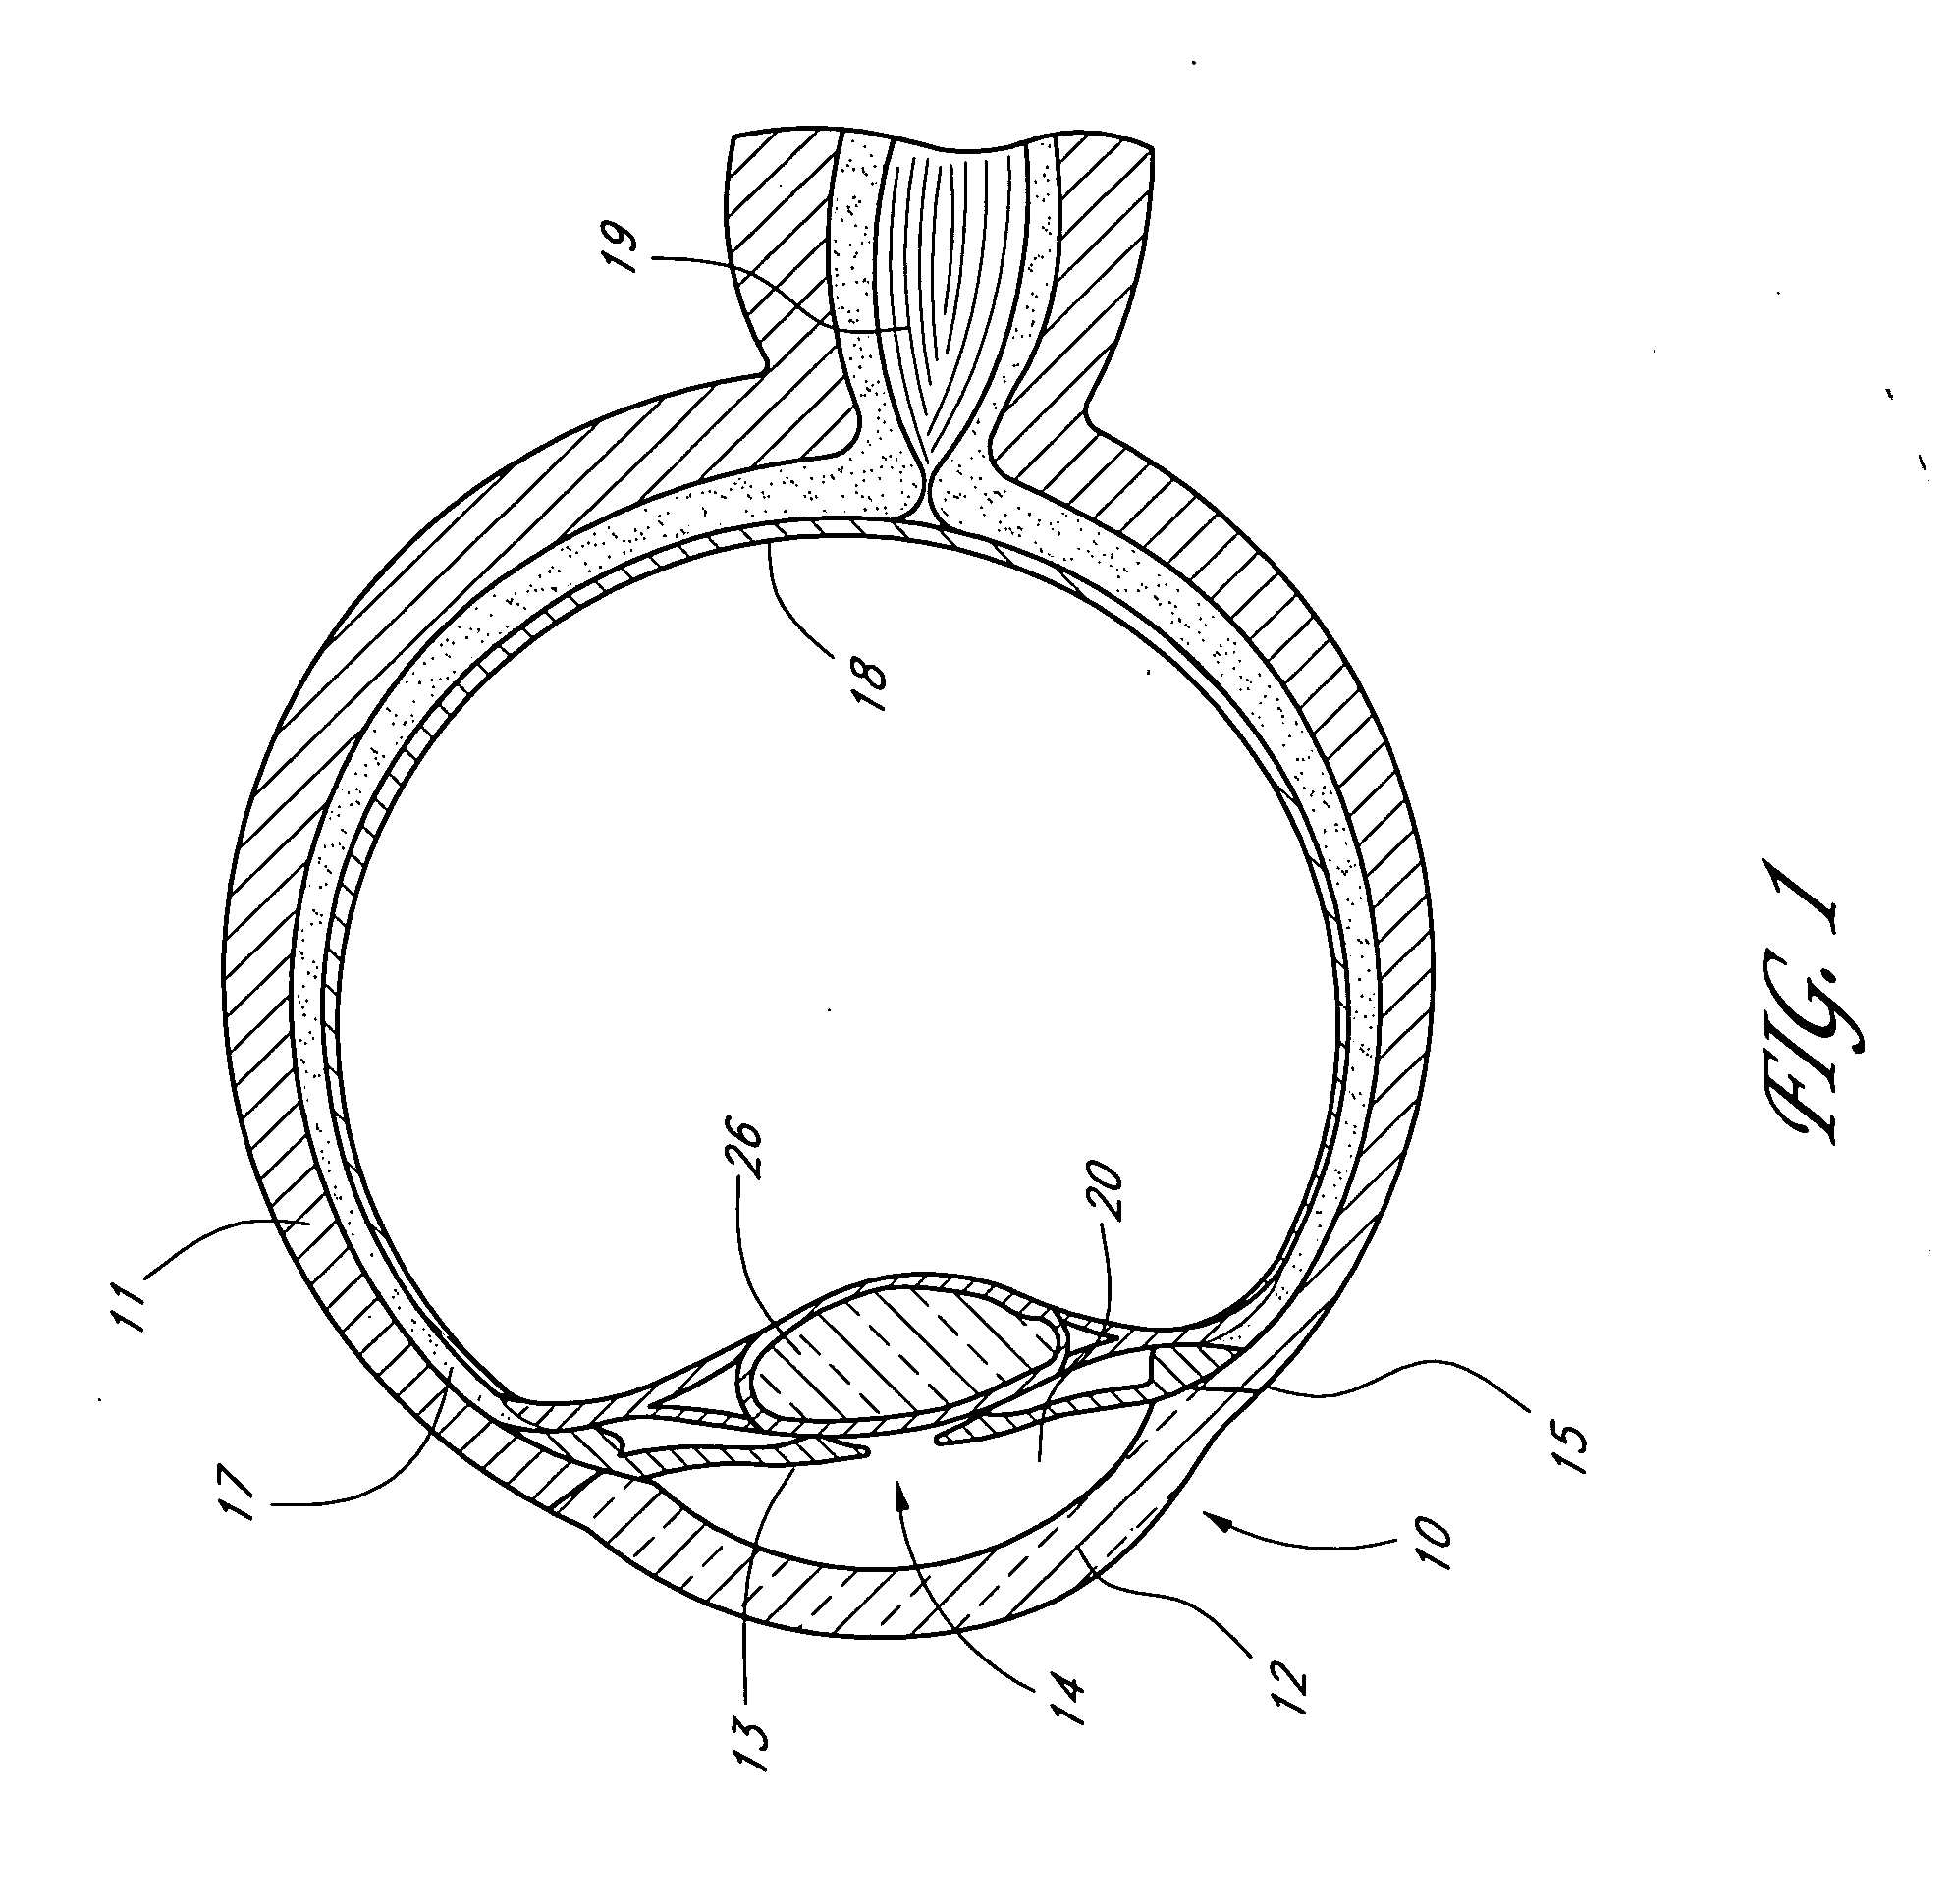 Glaucoma stent system